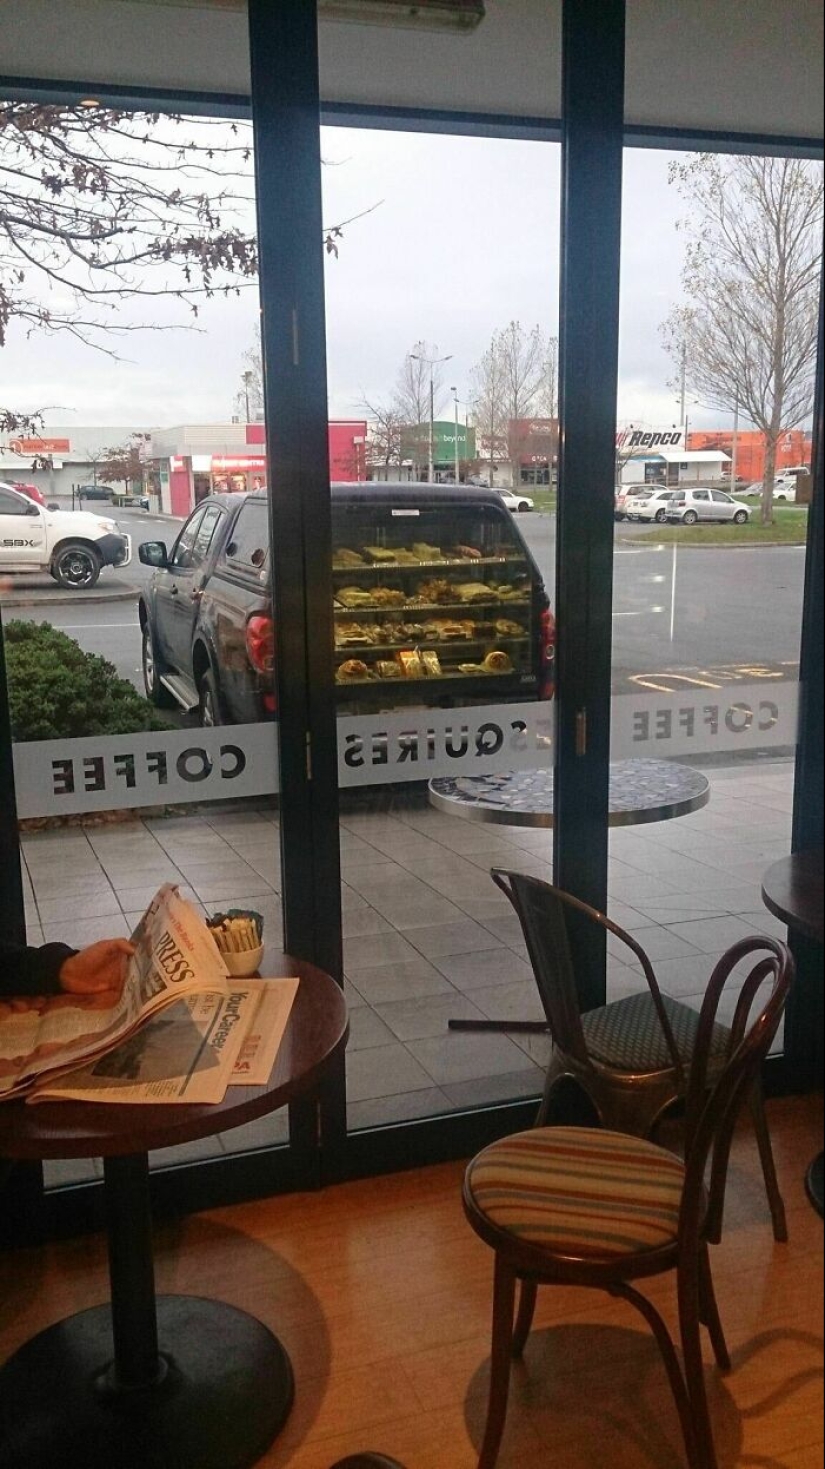 22 photos with reflections that raise a lot of questions